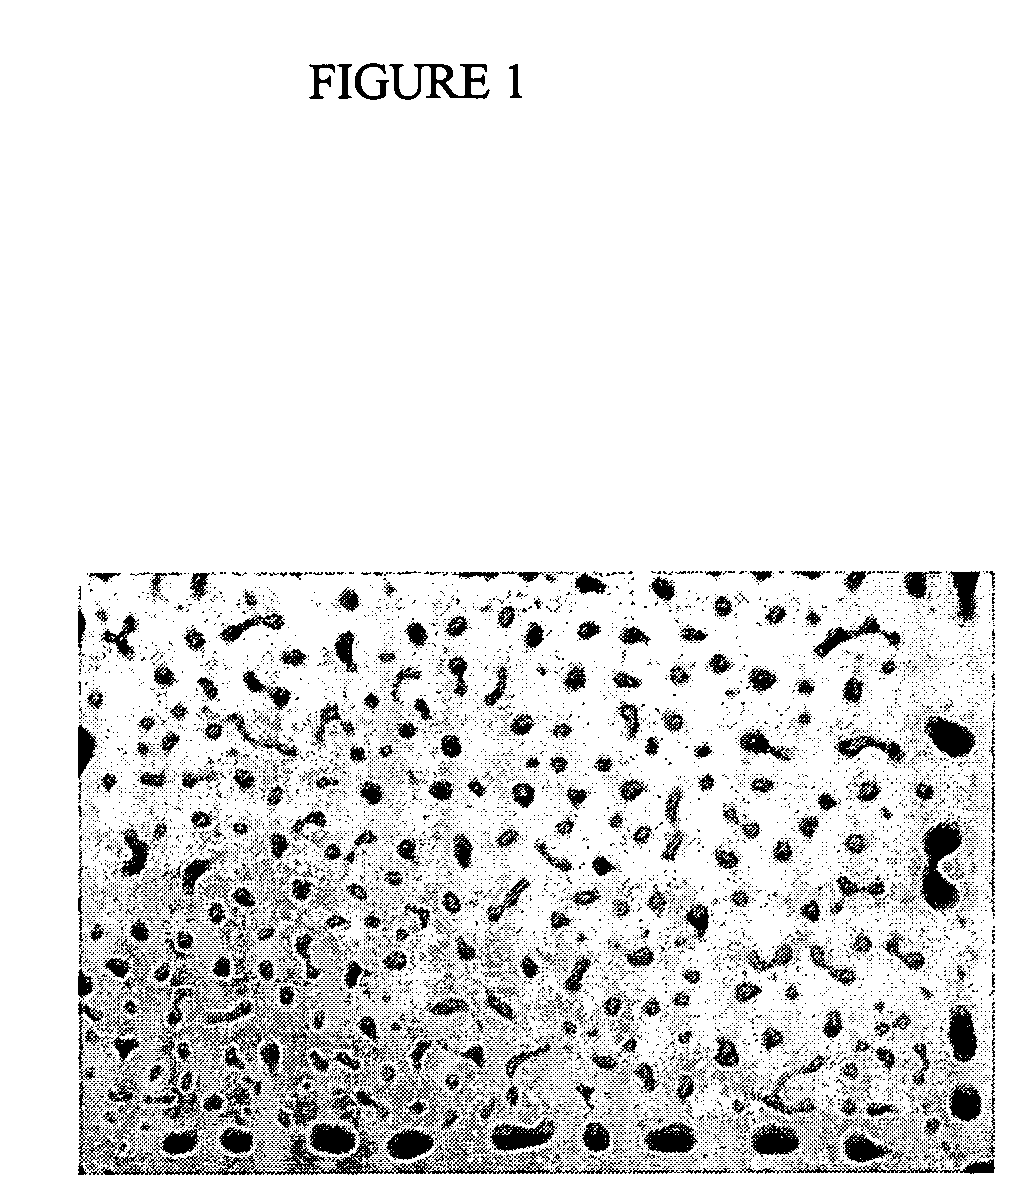 Fluorine-free disiloxane surfactant compositions for use in coatings and printing ink compositions